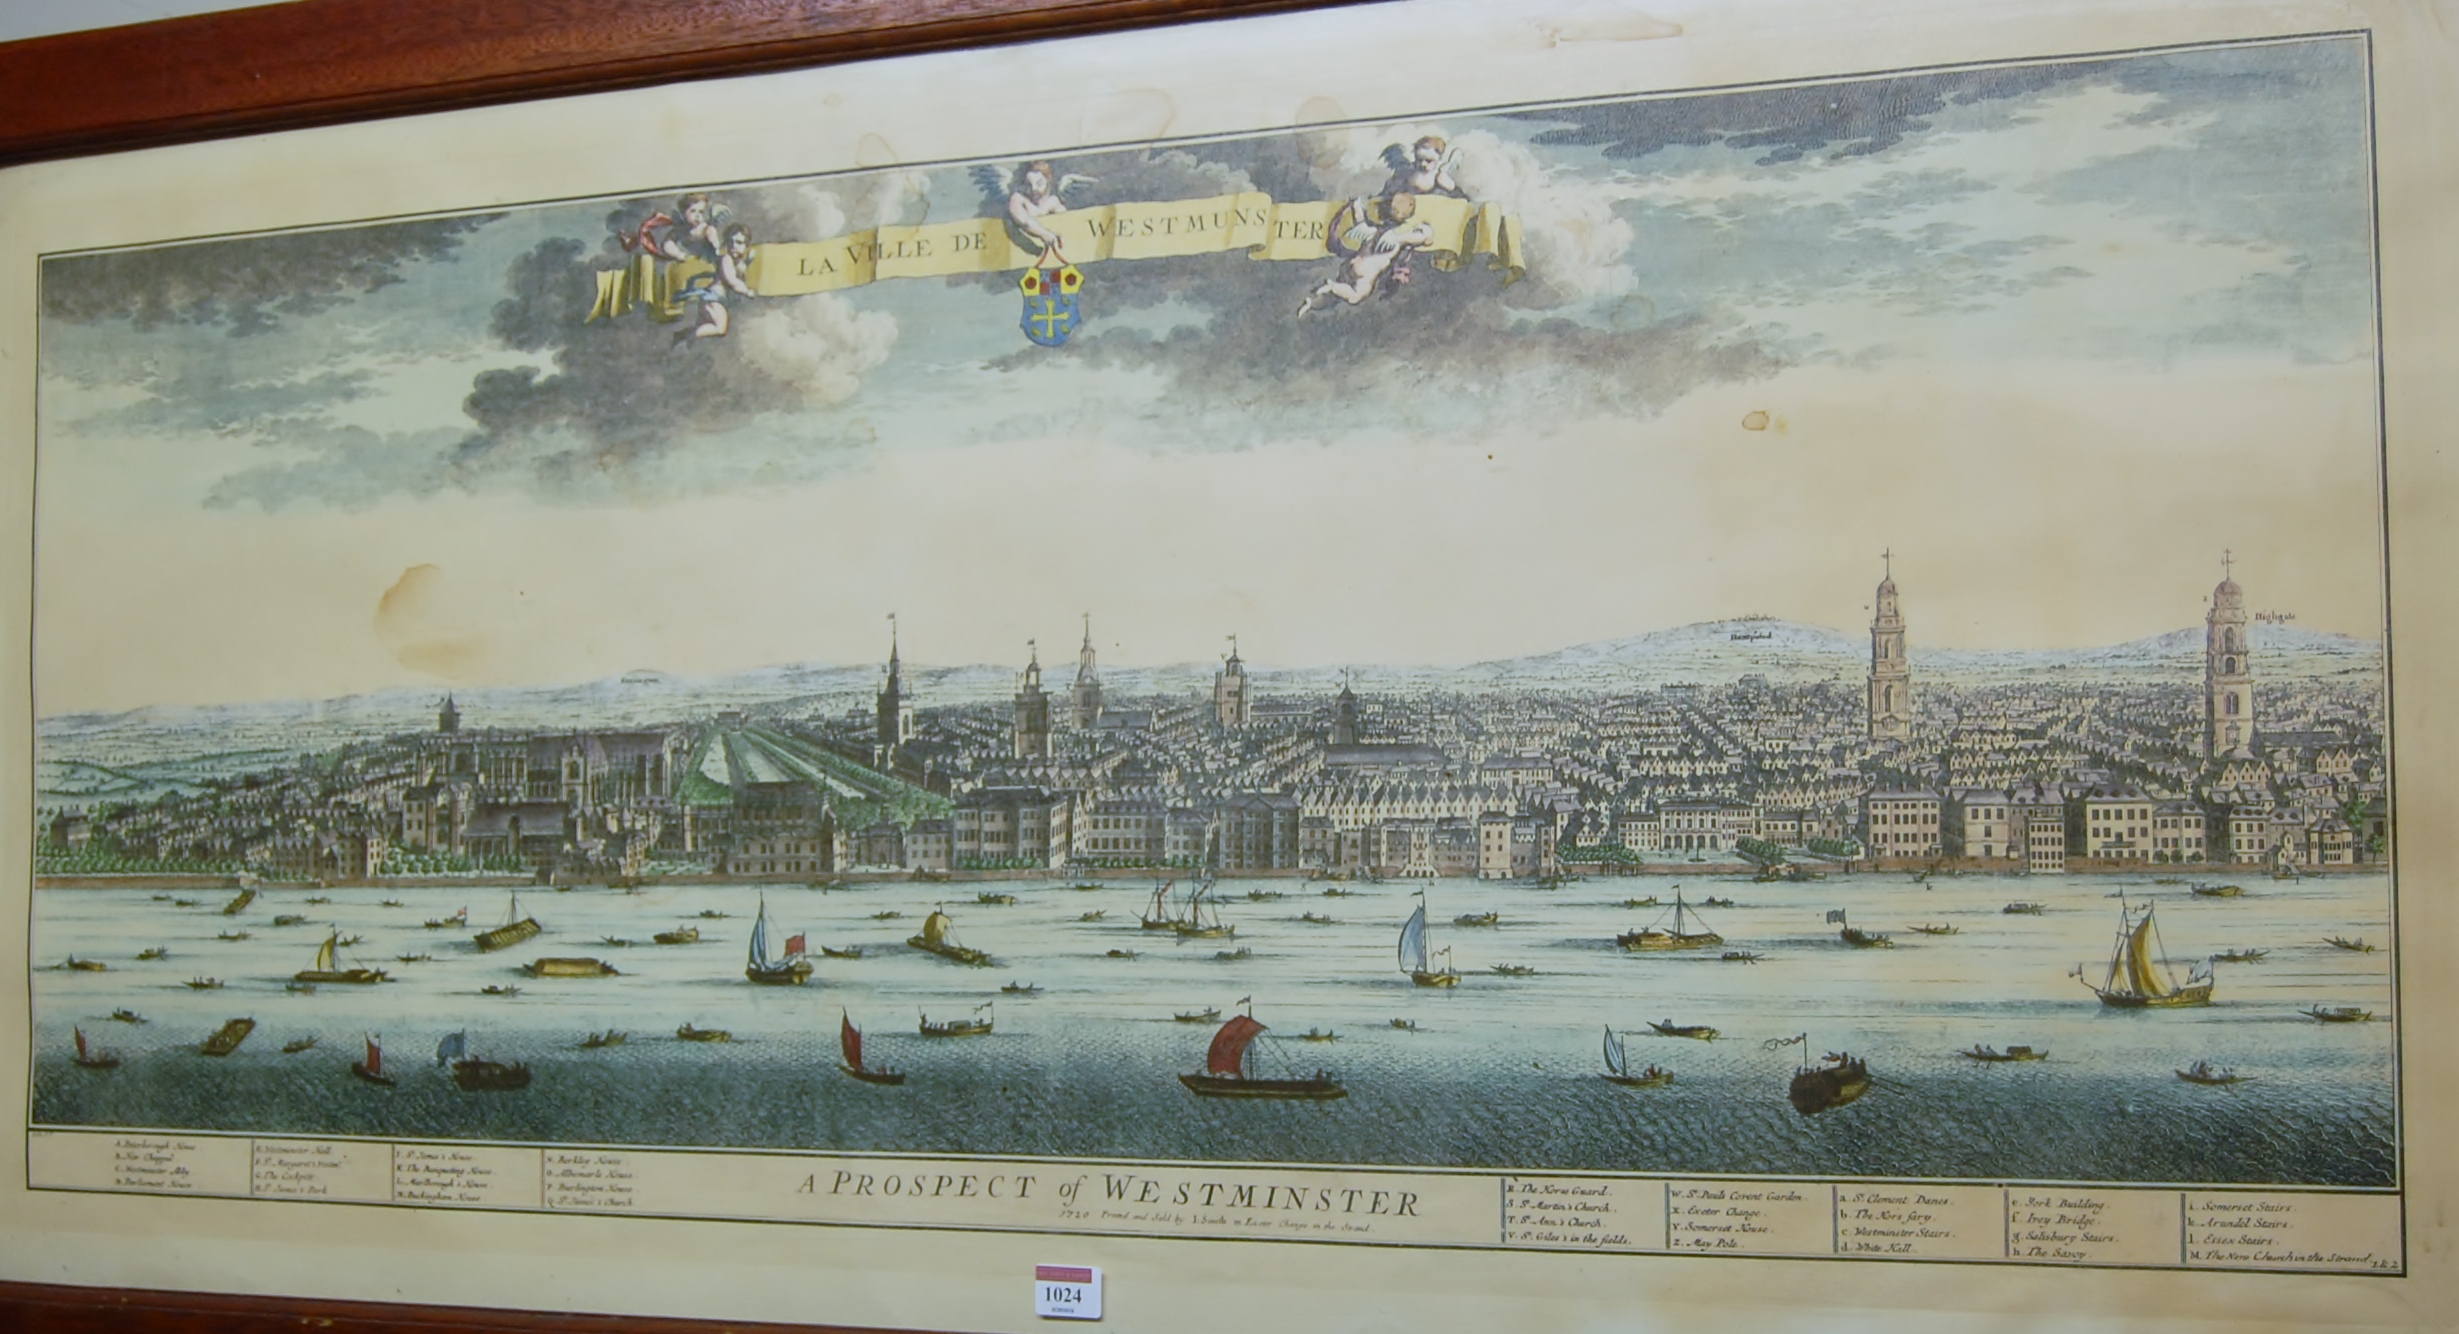 A Prospect of Westminster, reproduction topographical engraving, 52 x 115cm